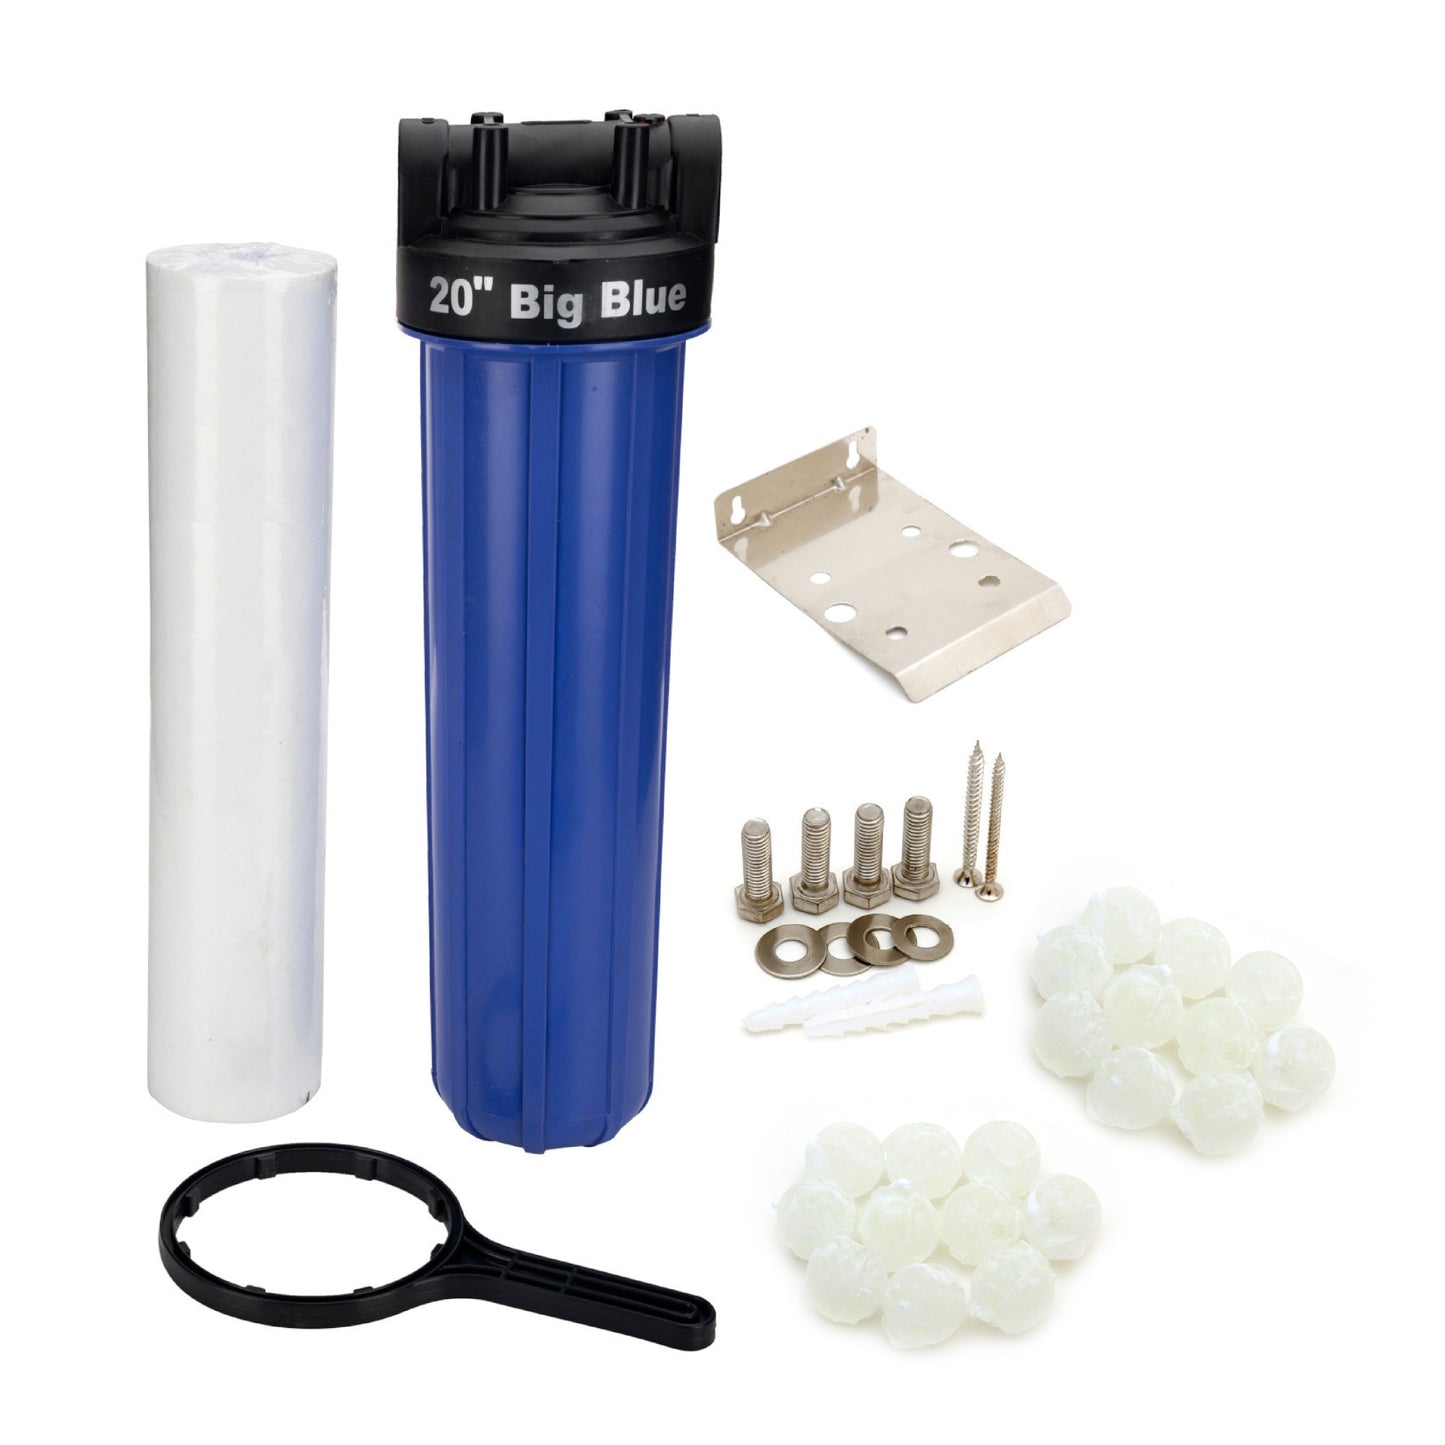 ASP-20 Mainline sediment filter | 20 inch big blue housing with spun cartridge | with water softening siliphos balls | 5 micron| 1 inch inlet outlet